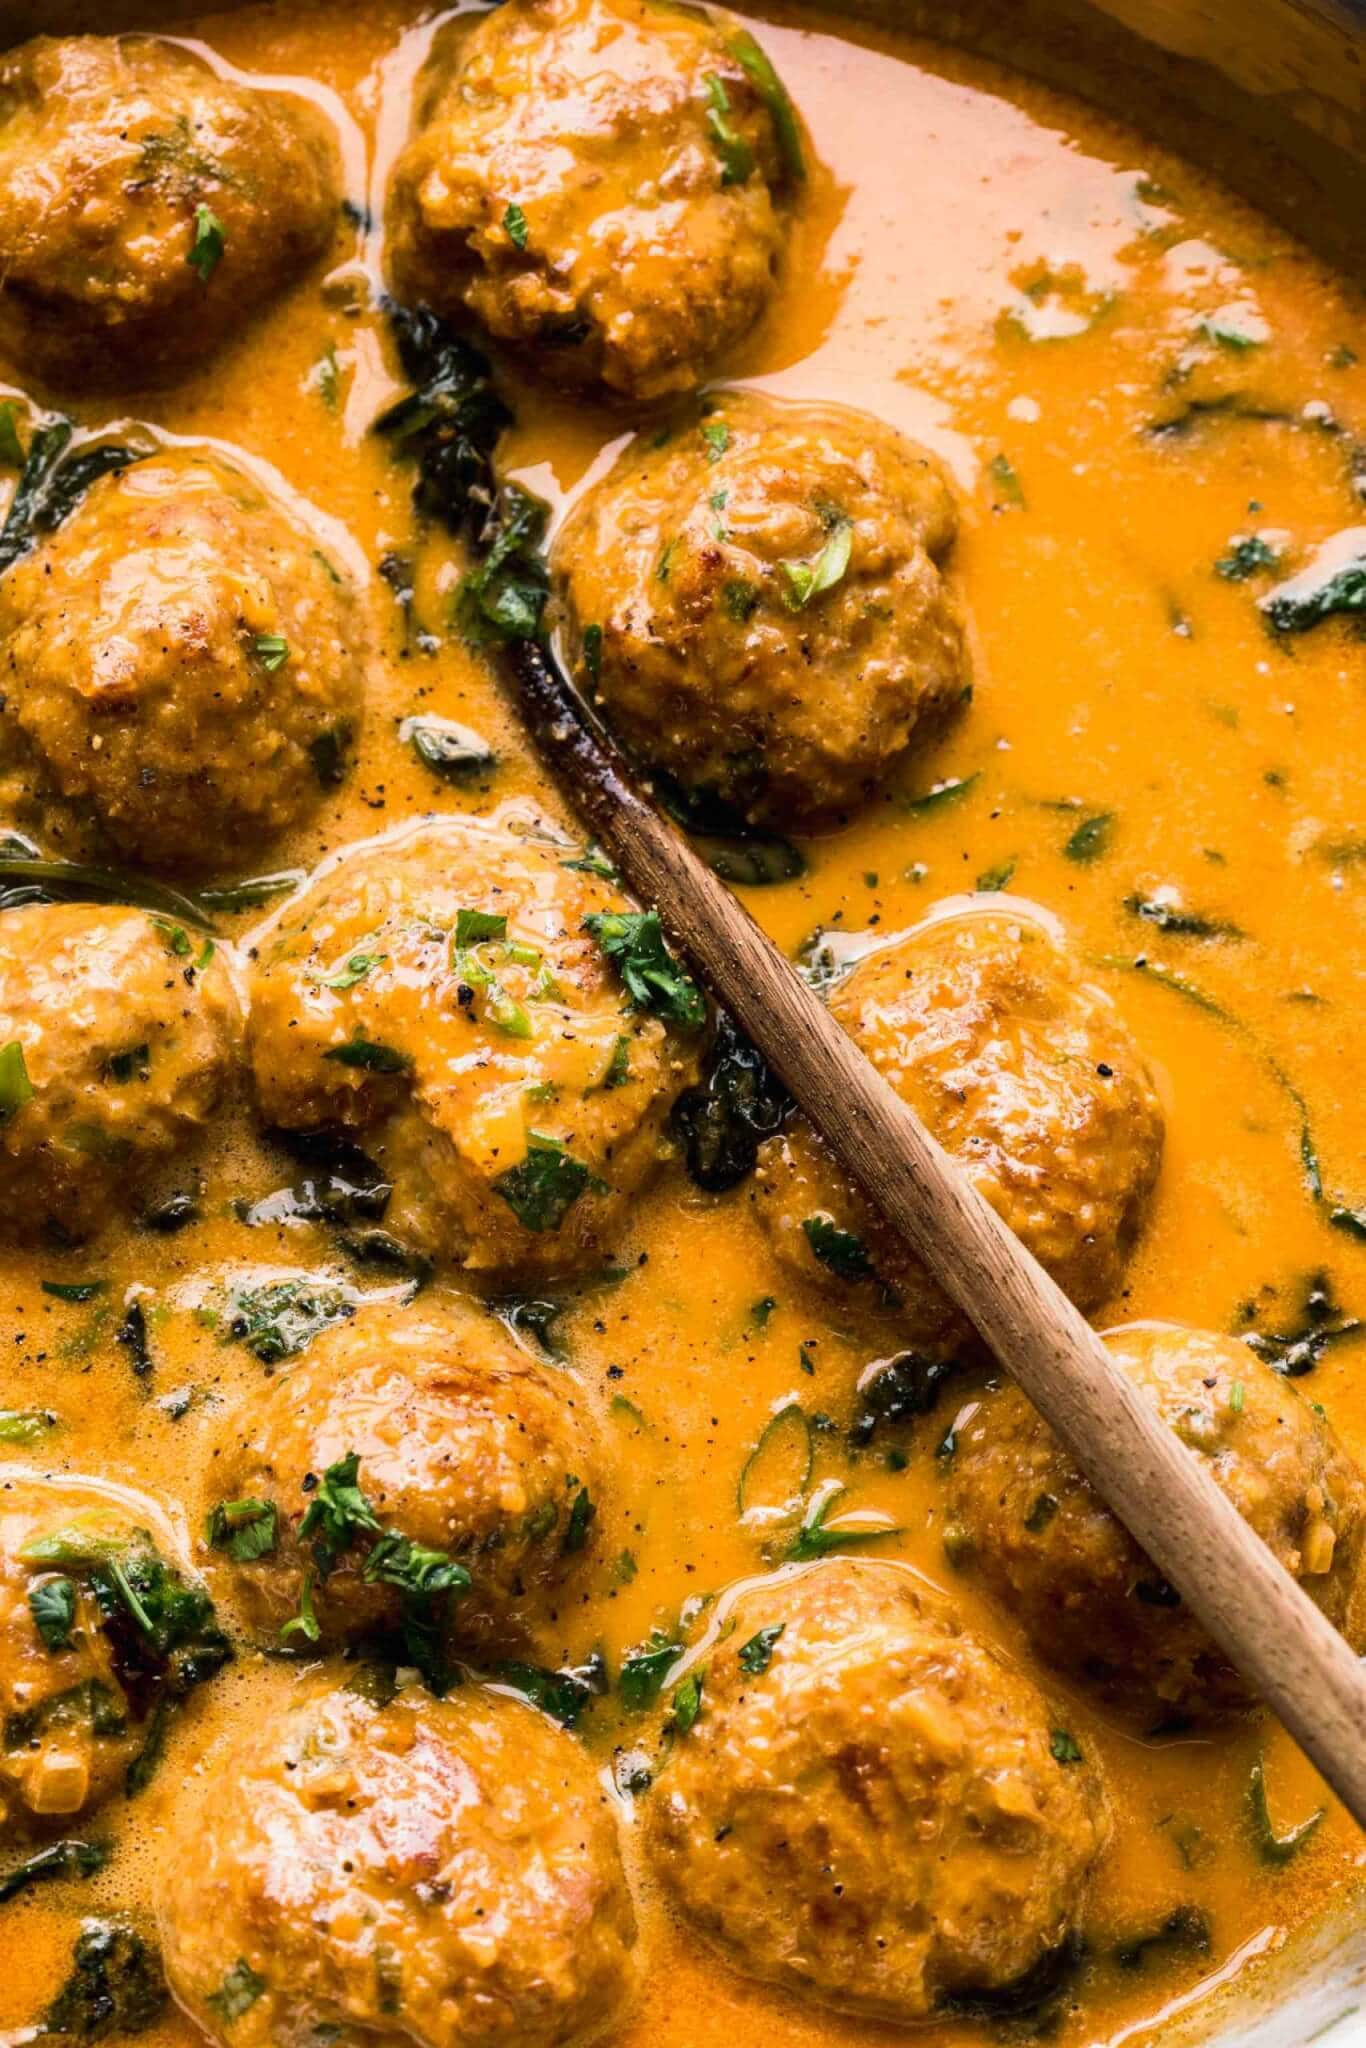 Meatballs simmering in curry sauce in skillet.